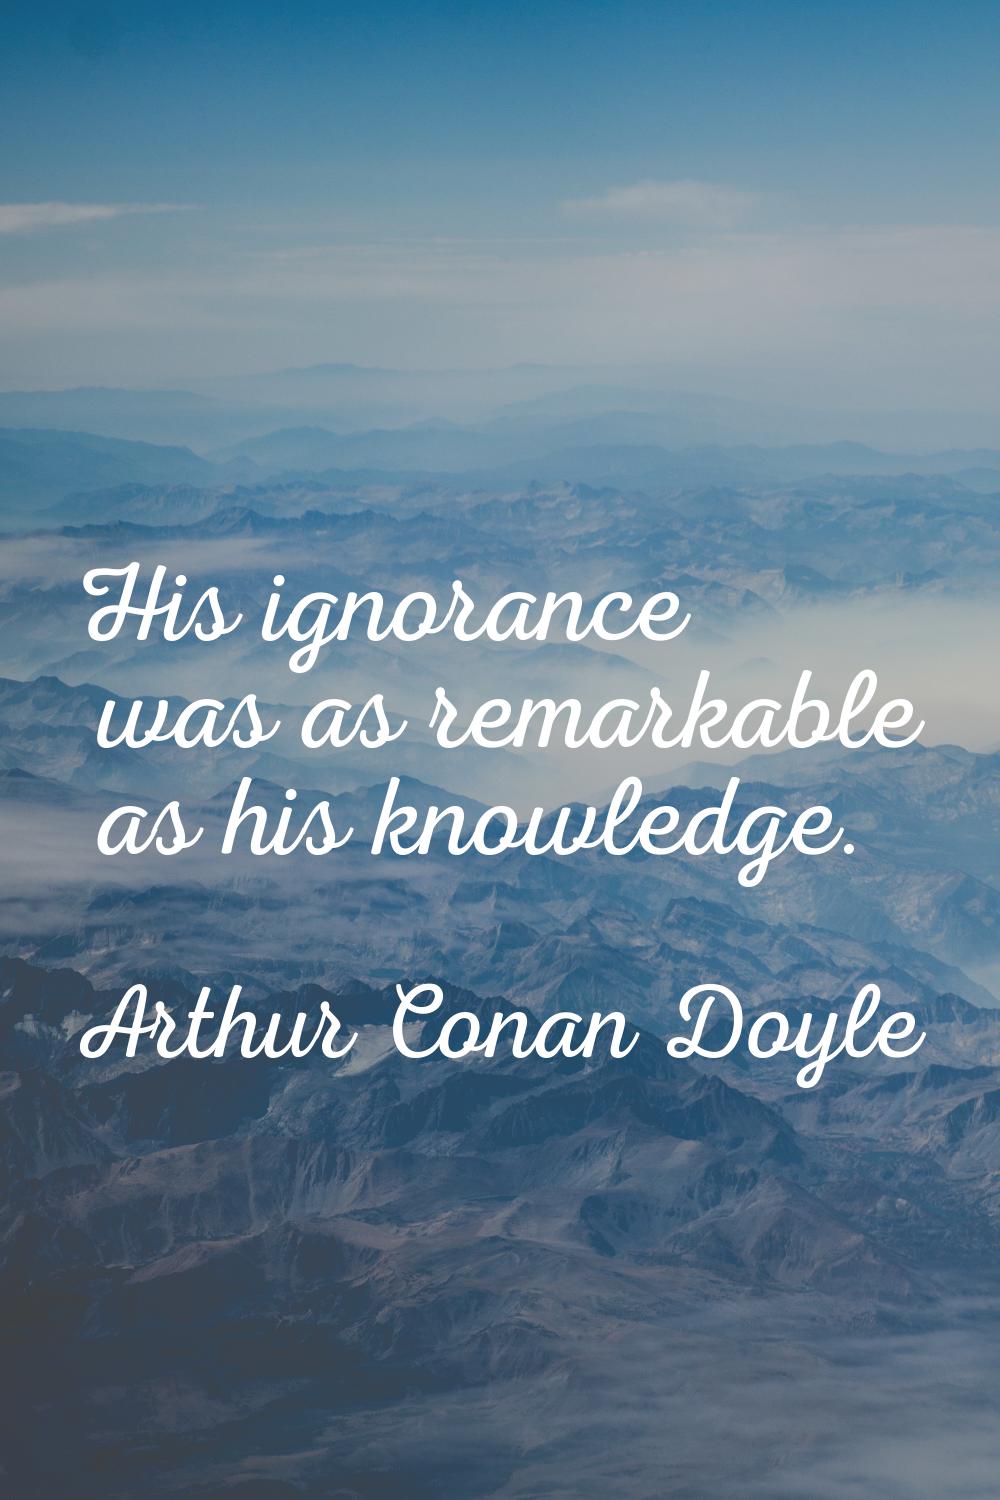 His ignorance was as remarkable as his knowledge.